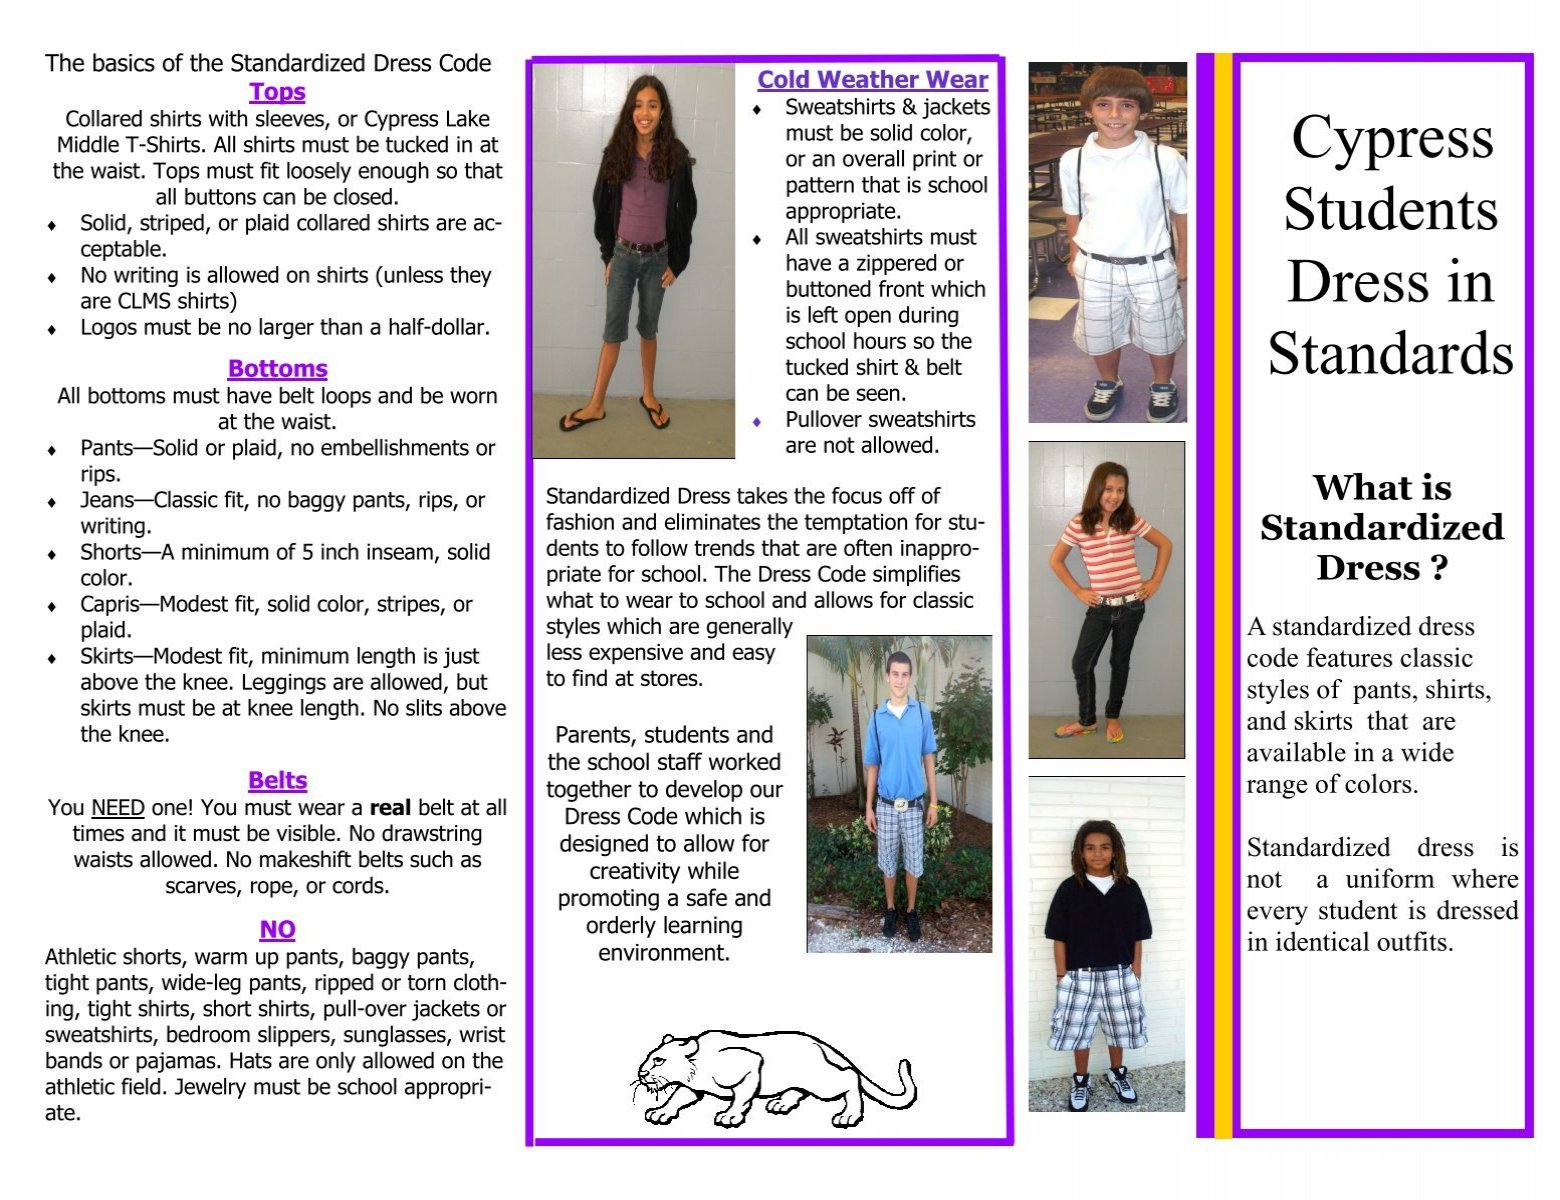 2009 Dress Code Brochure 1 Of 2 Cypress Lake Middle School - roblox high school clothes codes pjs